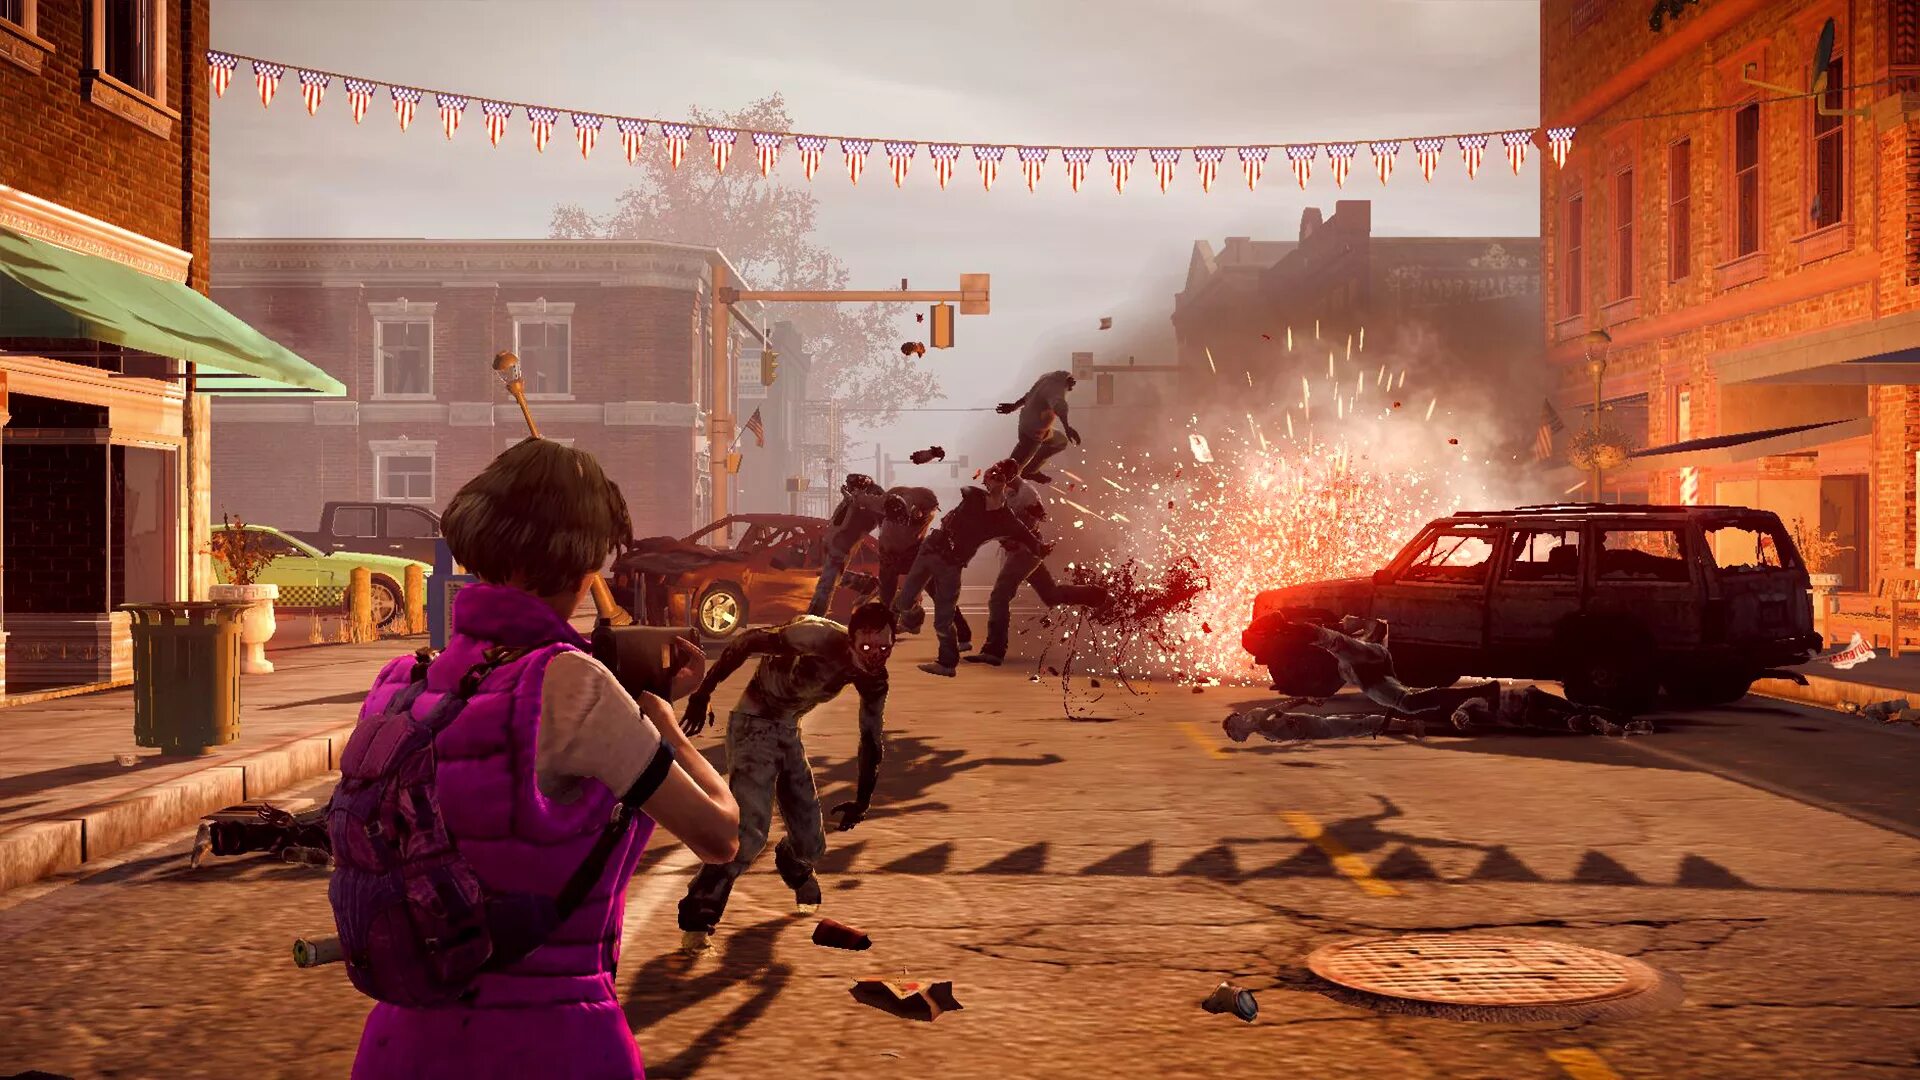 Игра бери 1 или 2. State of Decay 2. State of Decay 1. Игра State of Decay. Игра State of Decay 3.